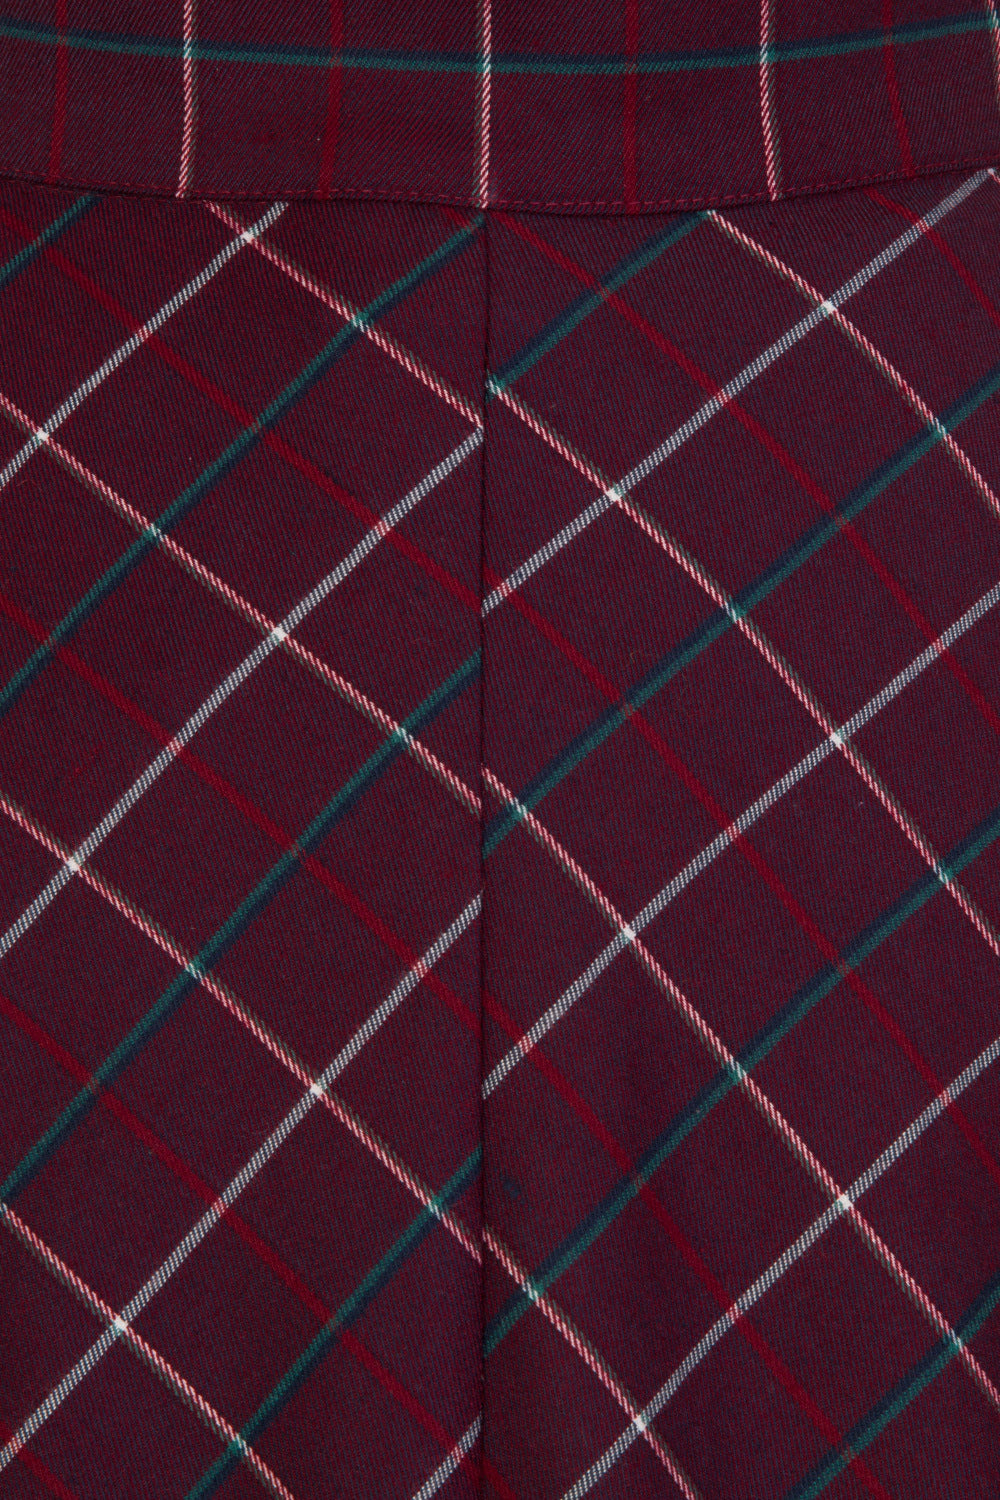 Seams at the back of the skirt and closeup of the check print